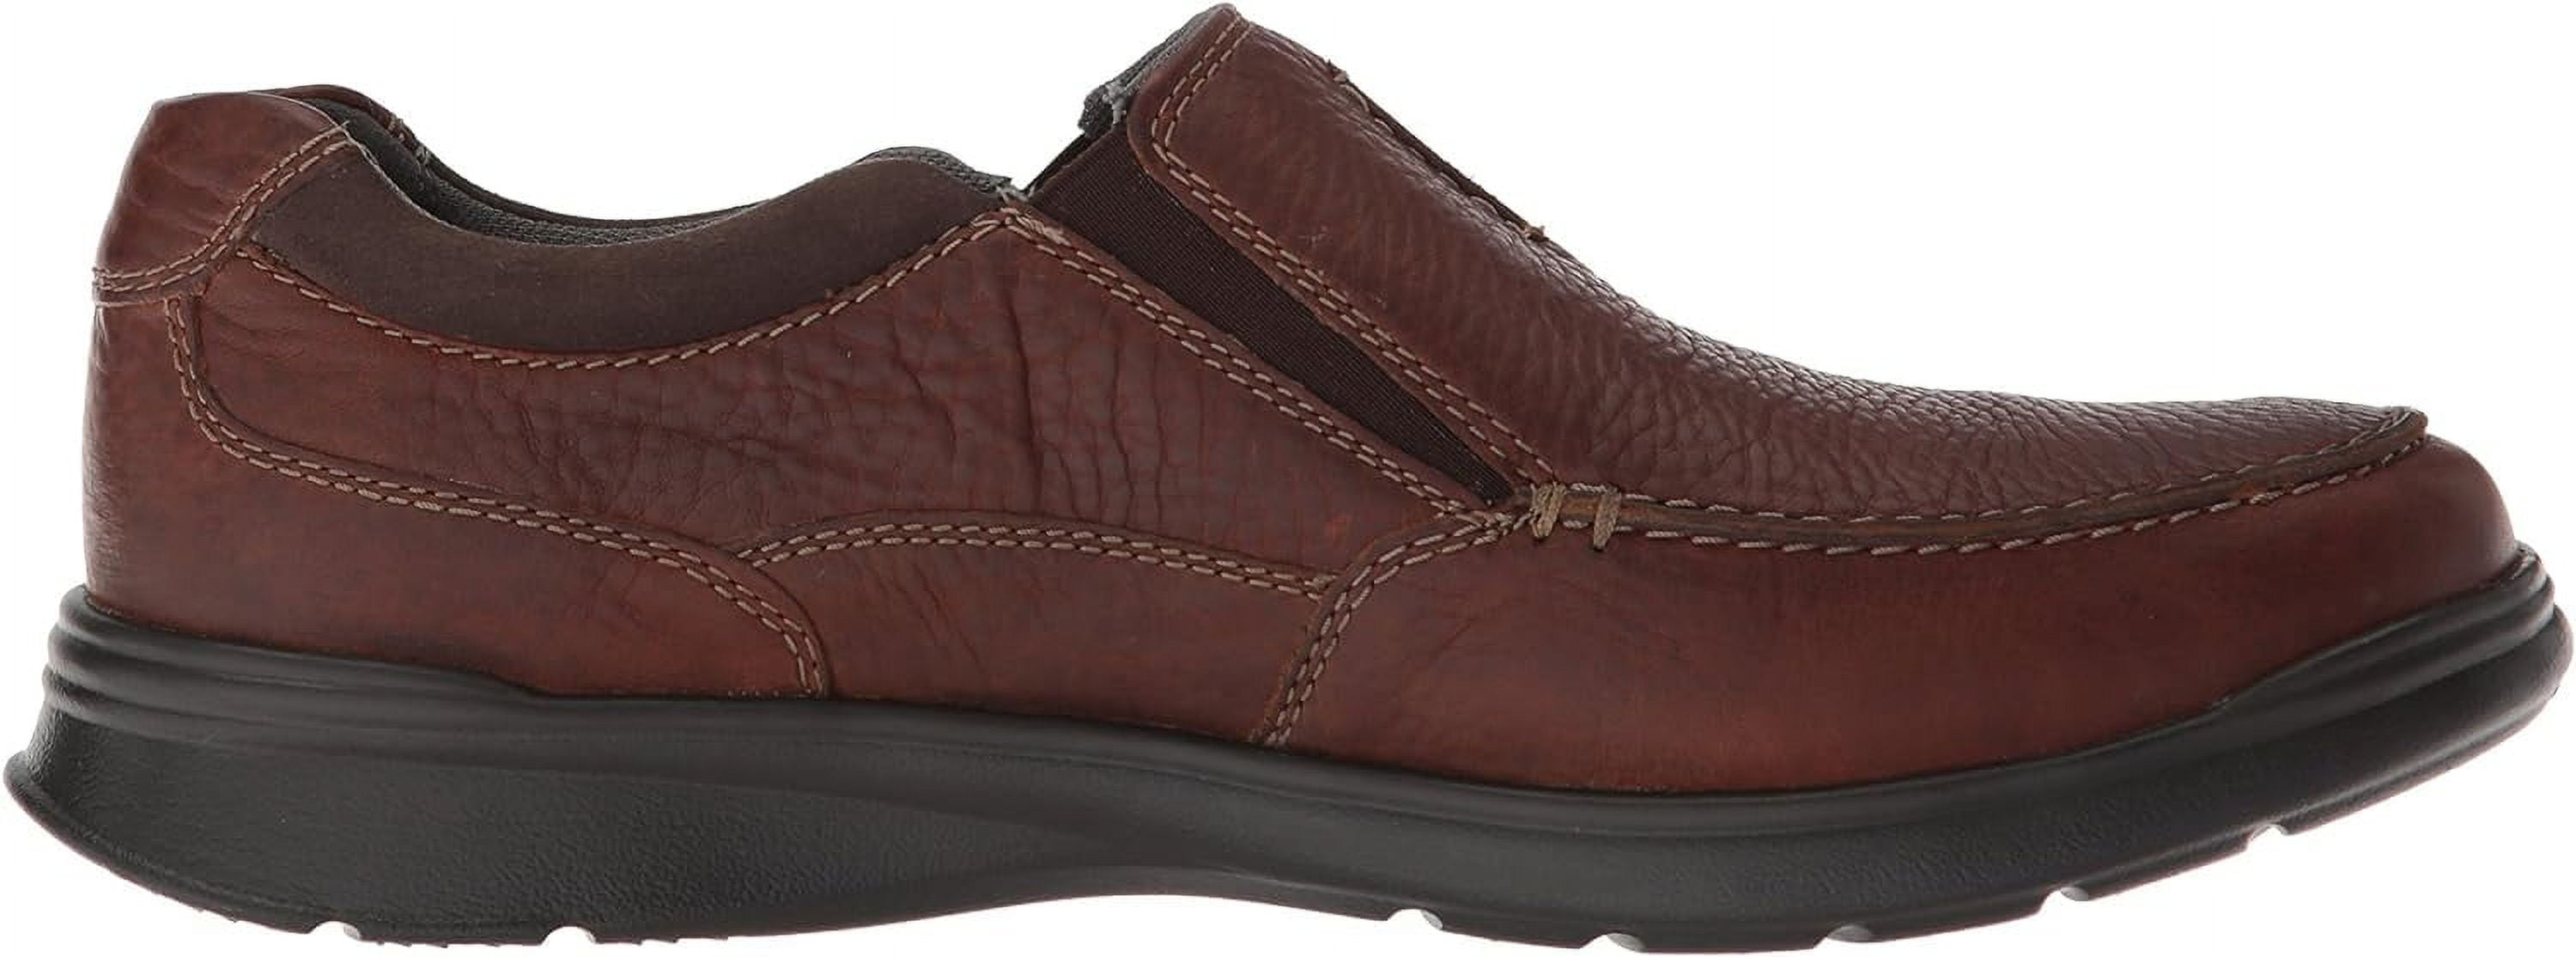 Clarks Men's Cotrell Free Loafer 11 Tobacco Leather